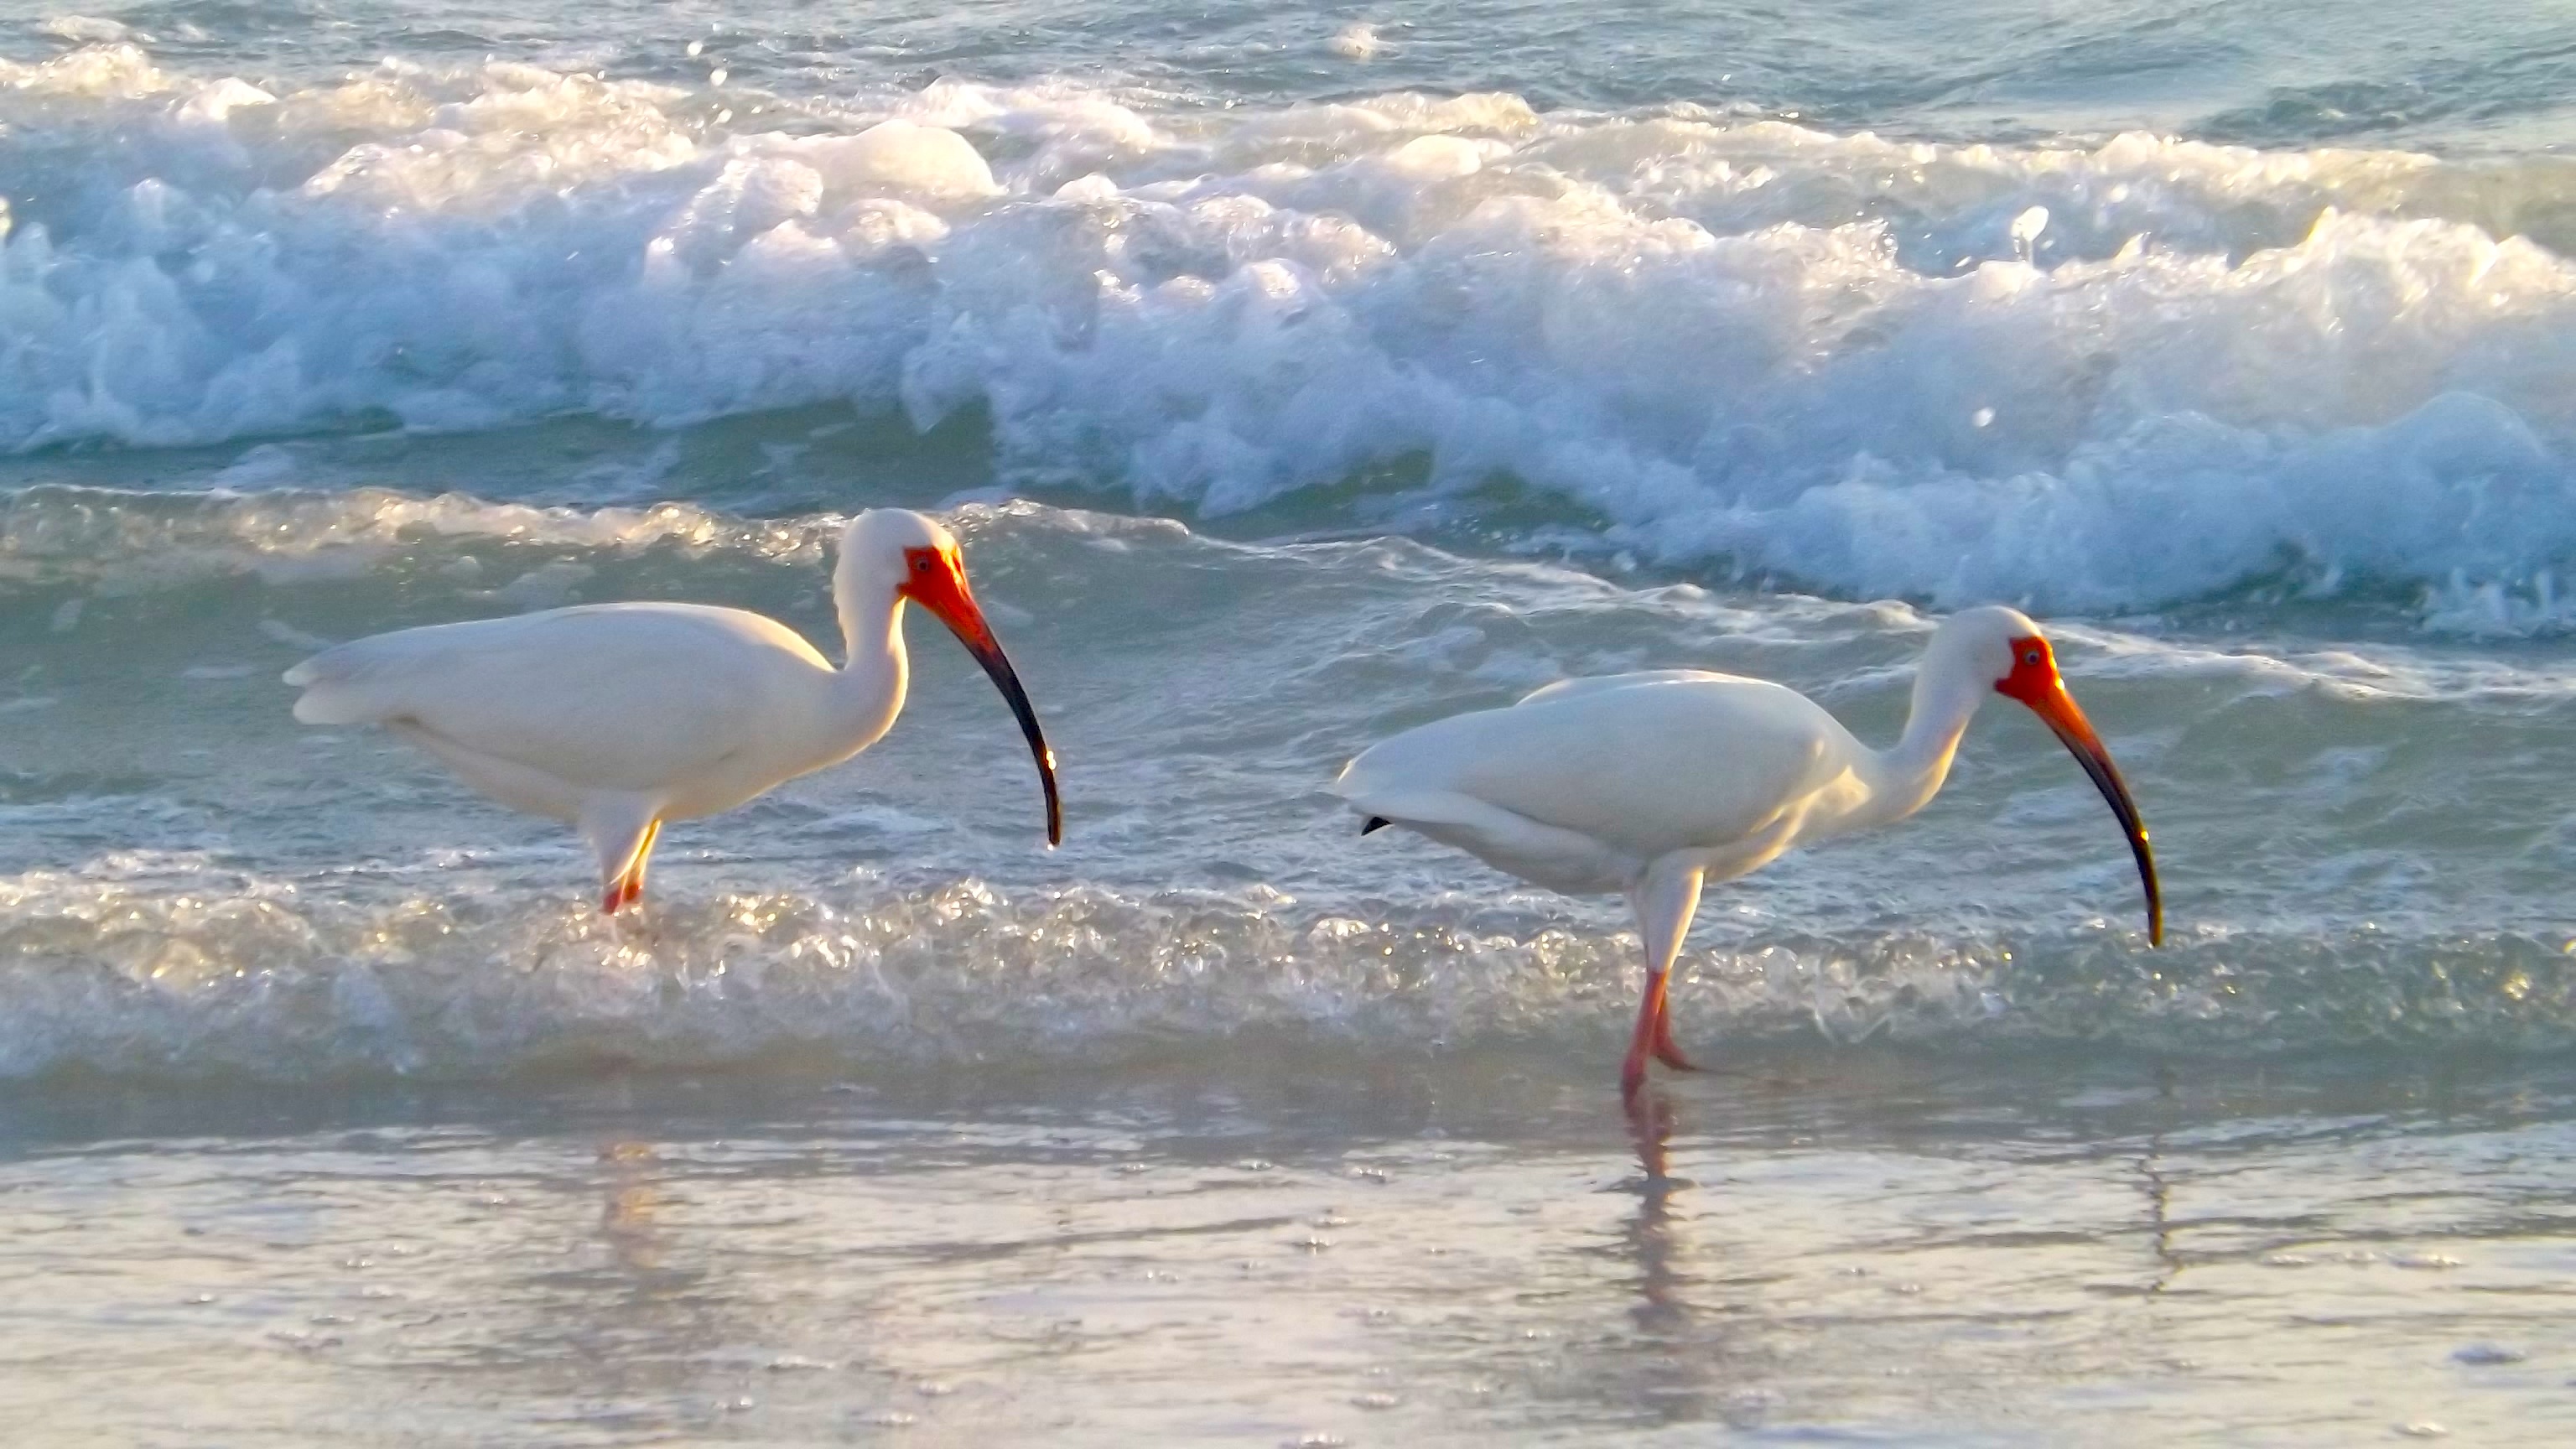 2 IBIS IN SURF PICTURE BY DOUGLAS K. POOR dd-TV.com